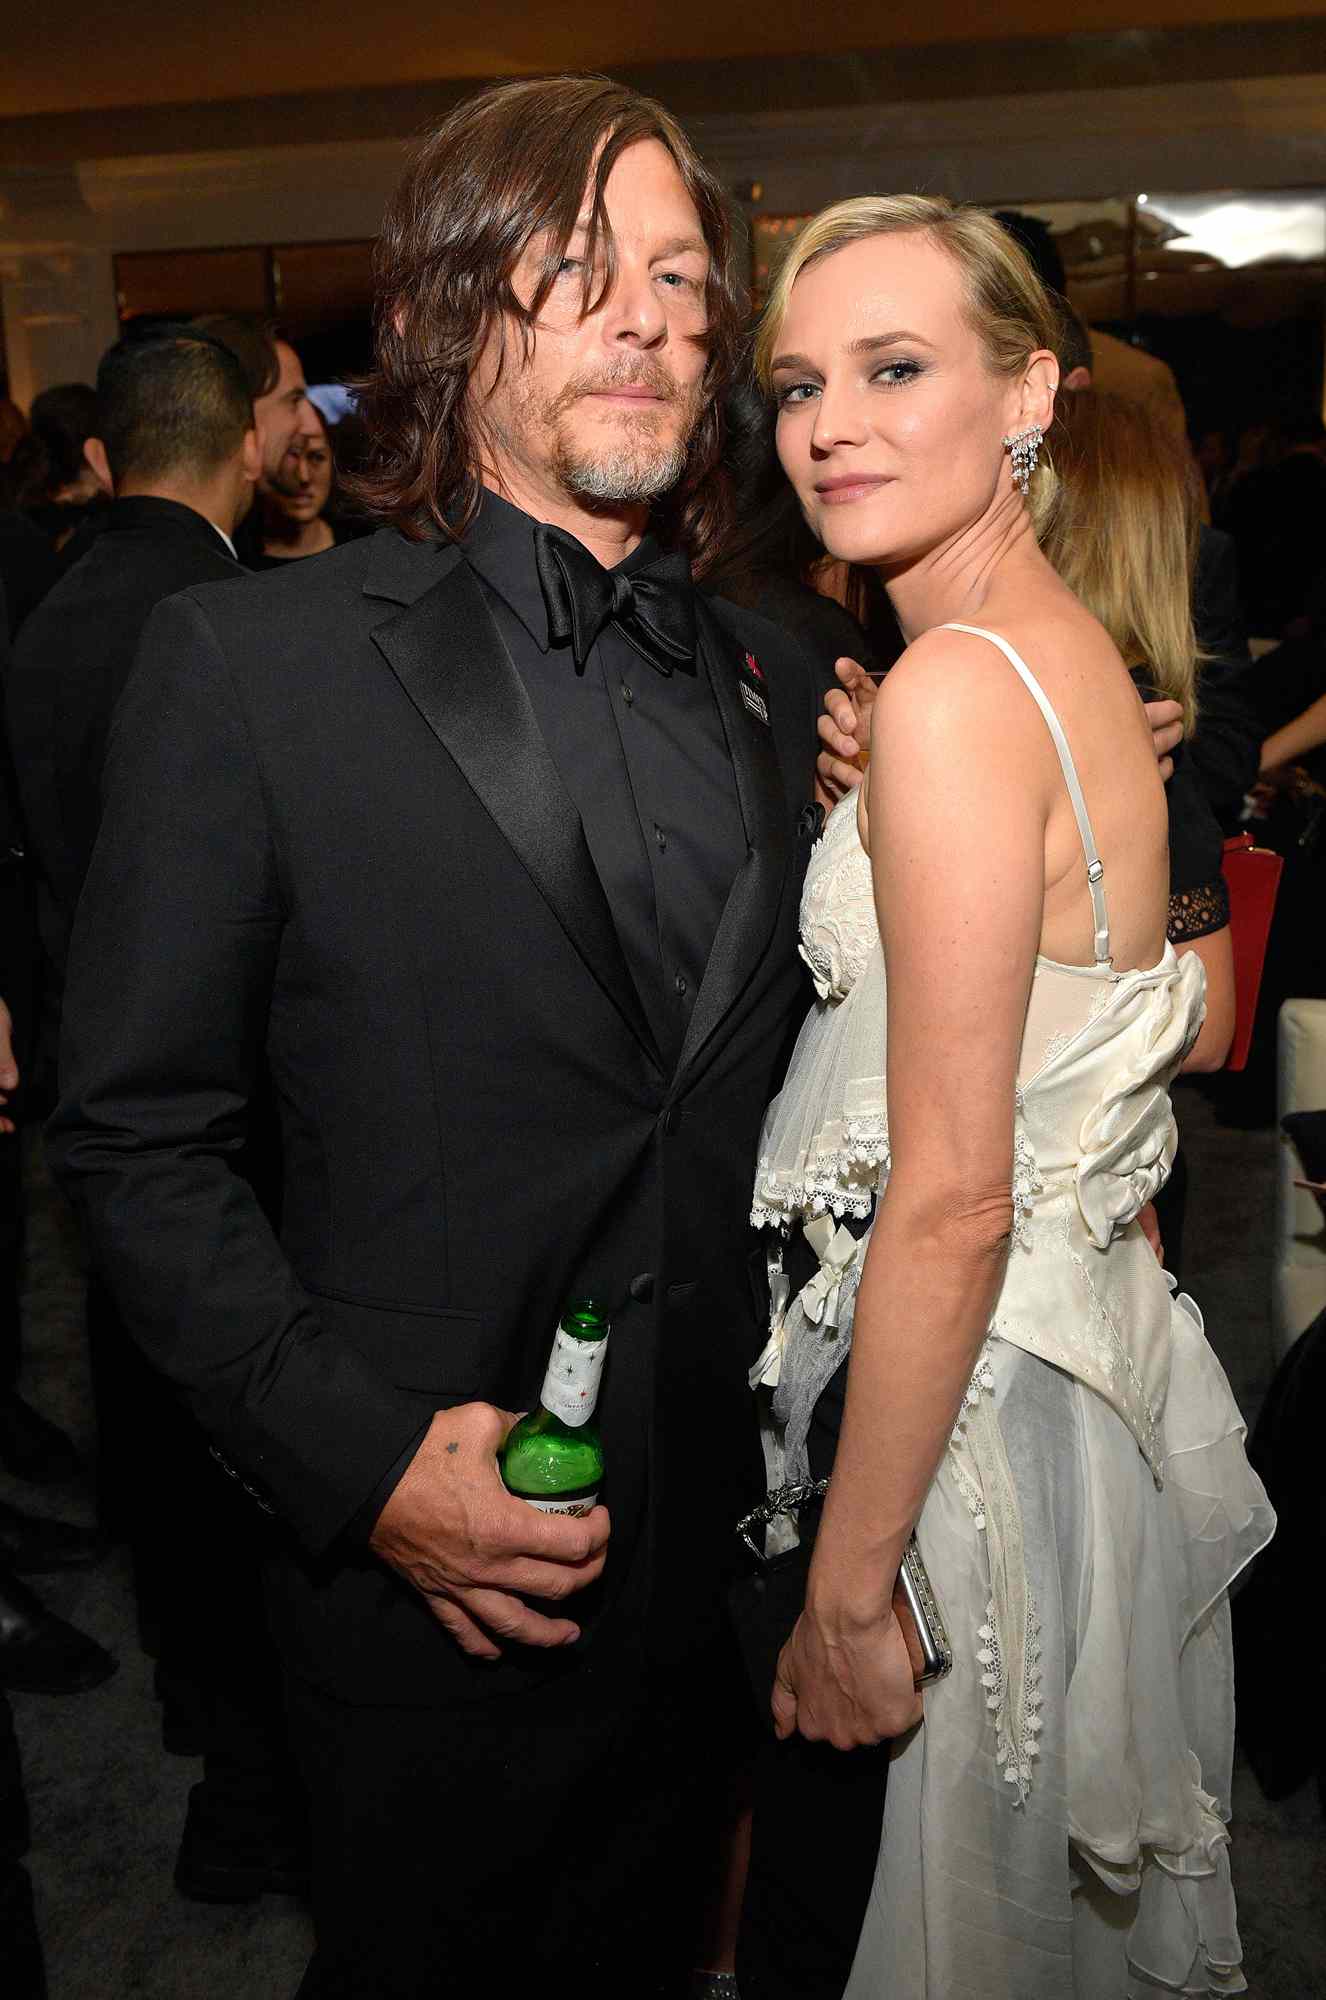 Norman Reedus (L) and Diane Kruger attend the 2018 InStyle and Warner Bros. 75th Annual Golden Globe Awards Post-Party at The Beverly Hilton Hotel on January 7, 2018 in Beverly Hills, California